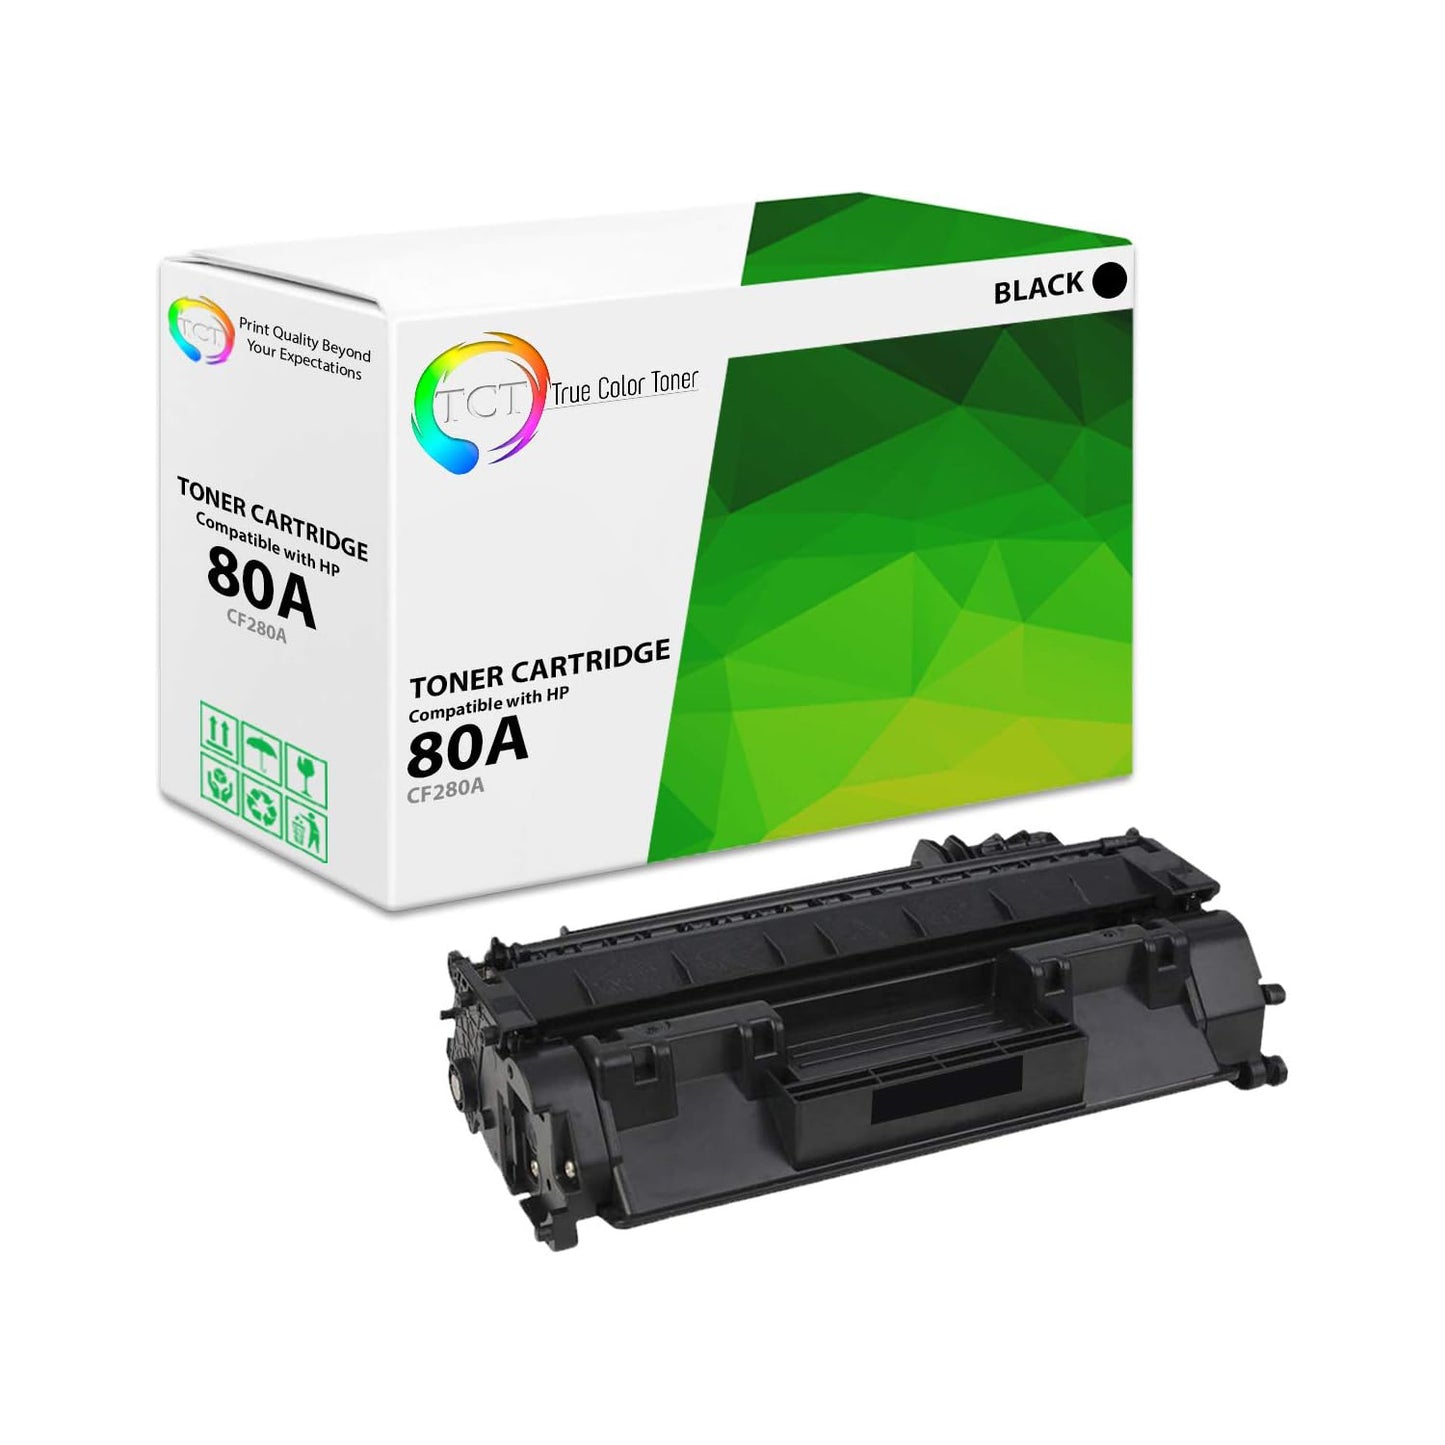 TCT Compatible Toner Cartridge Replacement for the HP 80A Series - 1 Pack Black